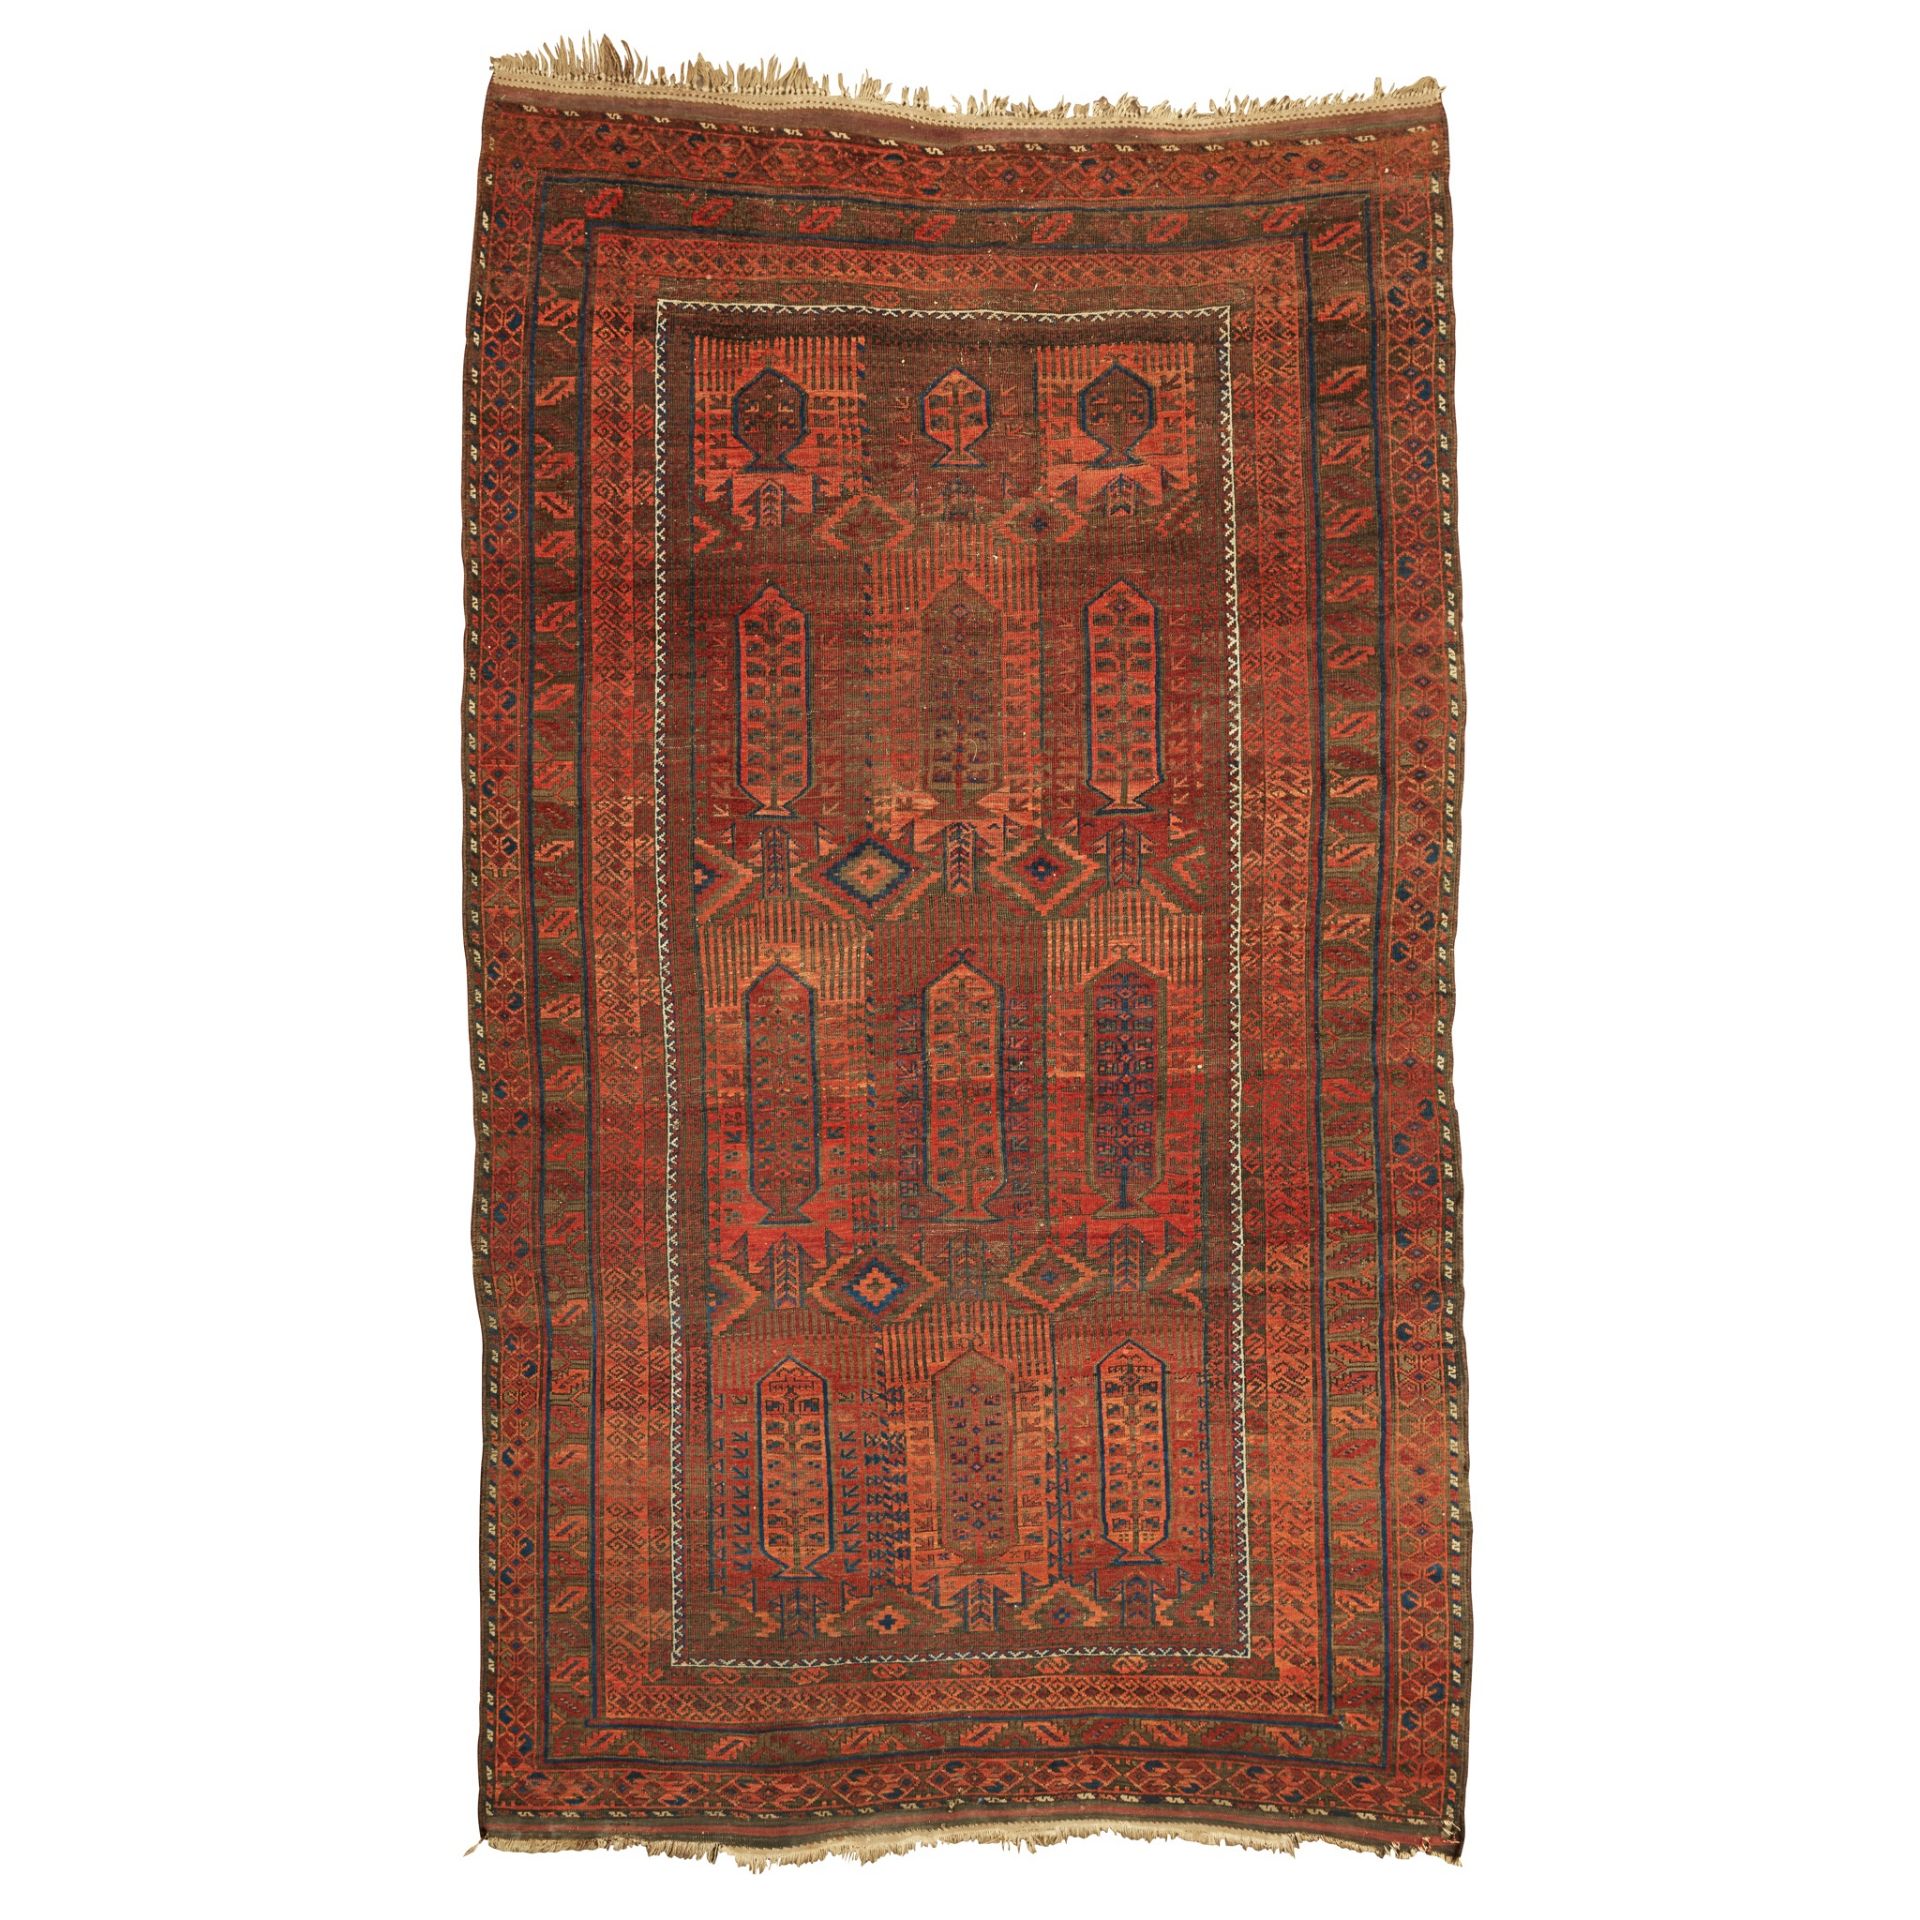 BELOUCH CARPET NORTHEAST PERSIA, LATE 19TH/EARLY 20TH CENTURY